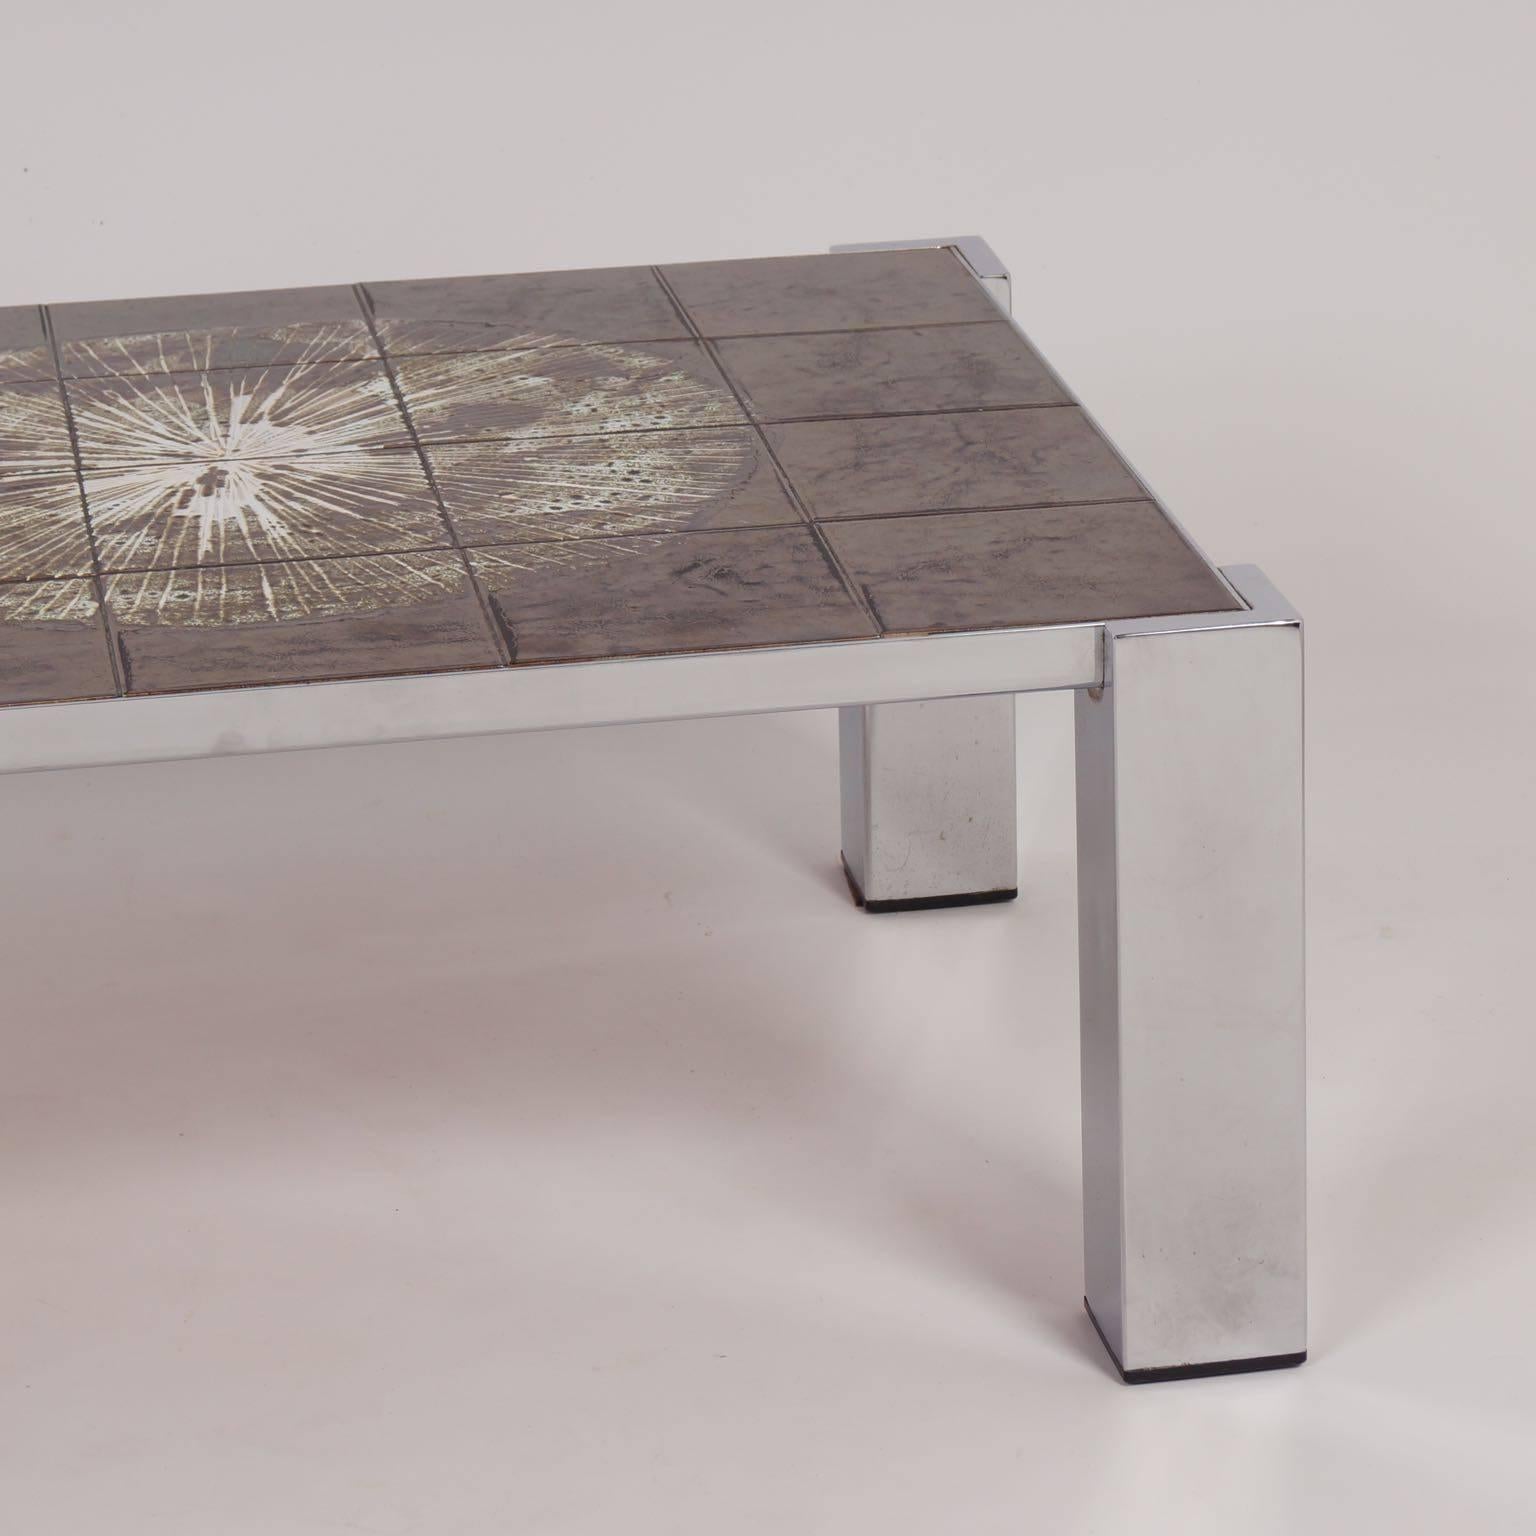 Hand-Painted Tile Coffee Table by Belarti, 1960s For Sale 1